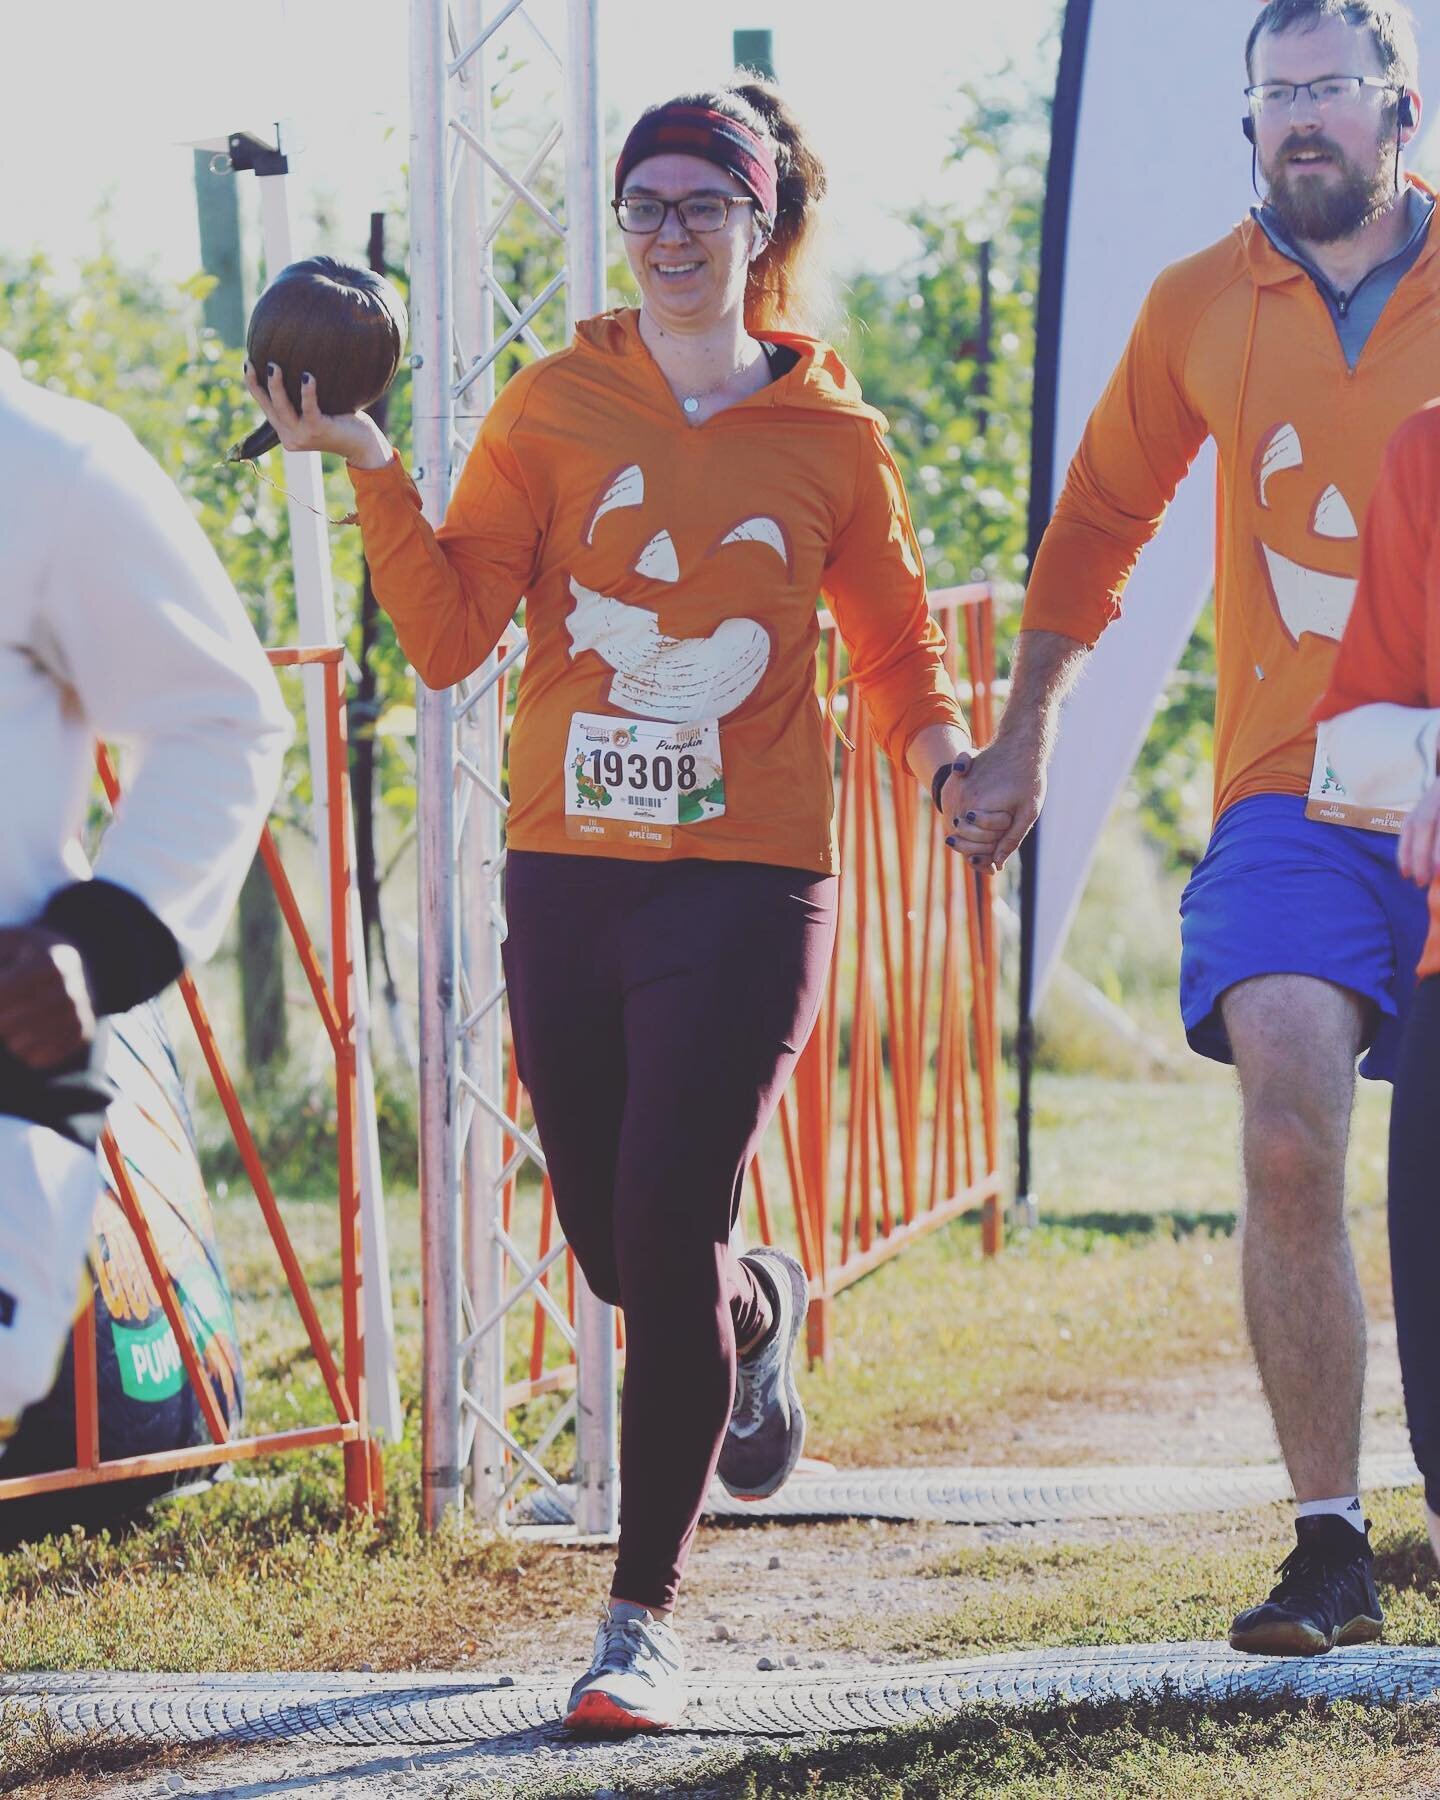 Maybe next year we&rsquo;ll work on our running faces&hellip; maybe not 🤣
#lol #gourdyspumpkinrun2022 #toughpumpkin